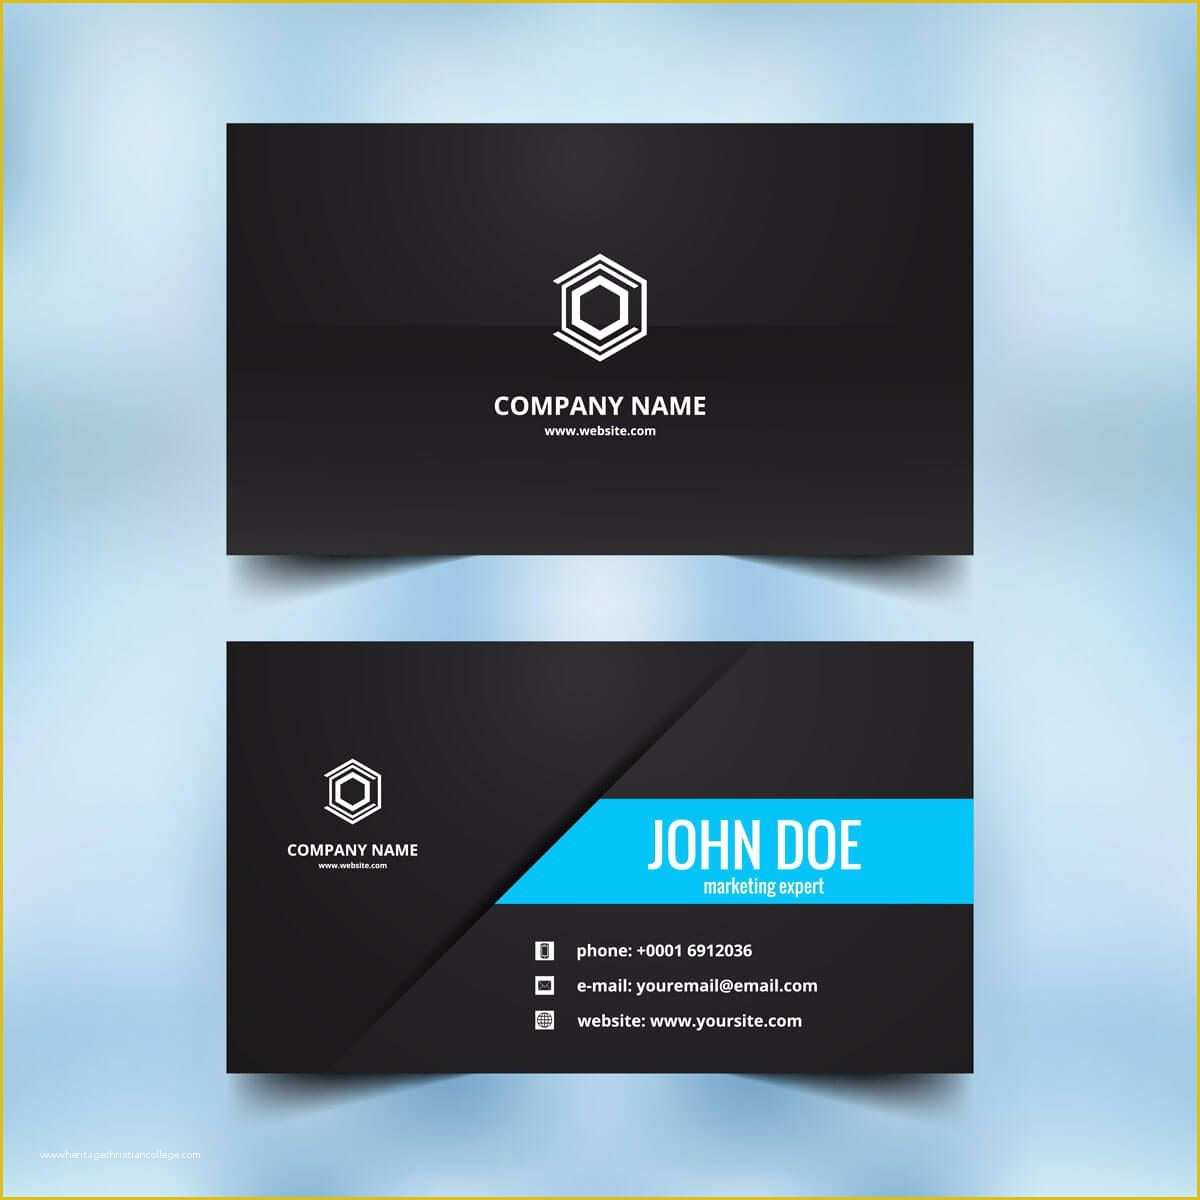 Free Business Card Design Templates Of Pin by Ravneel Chand On Logo